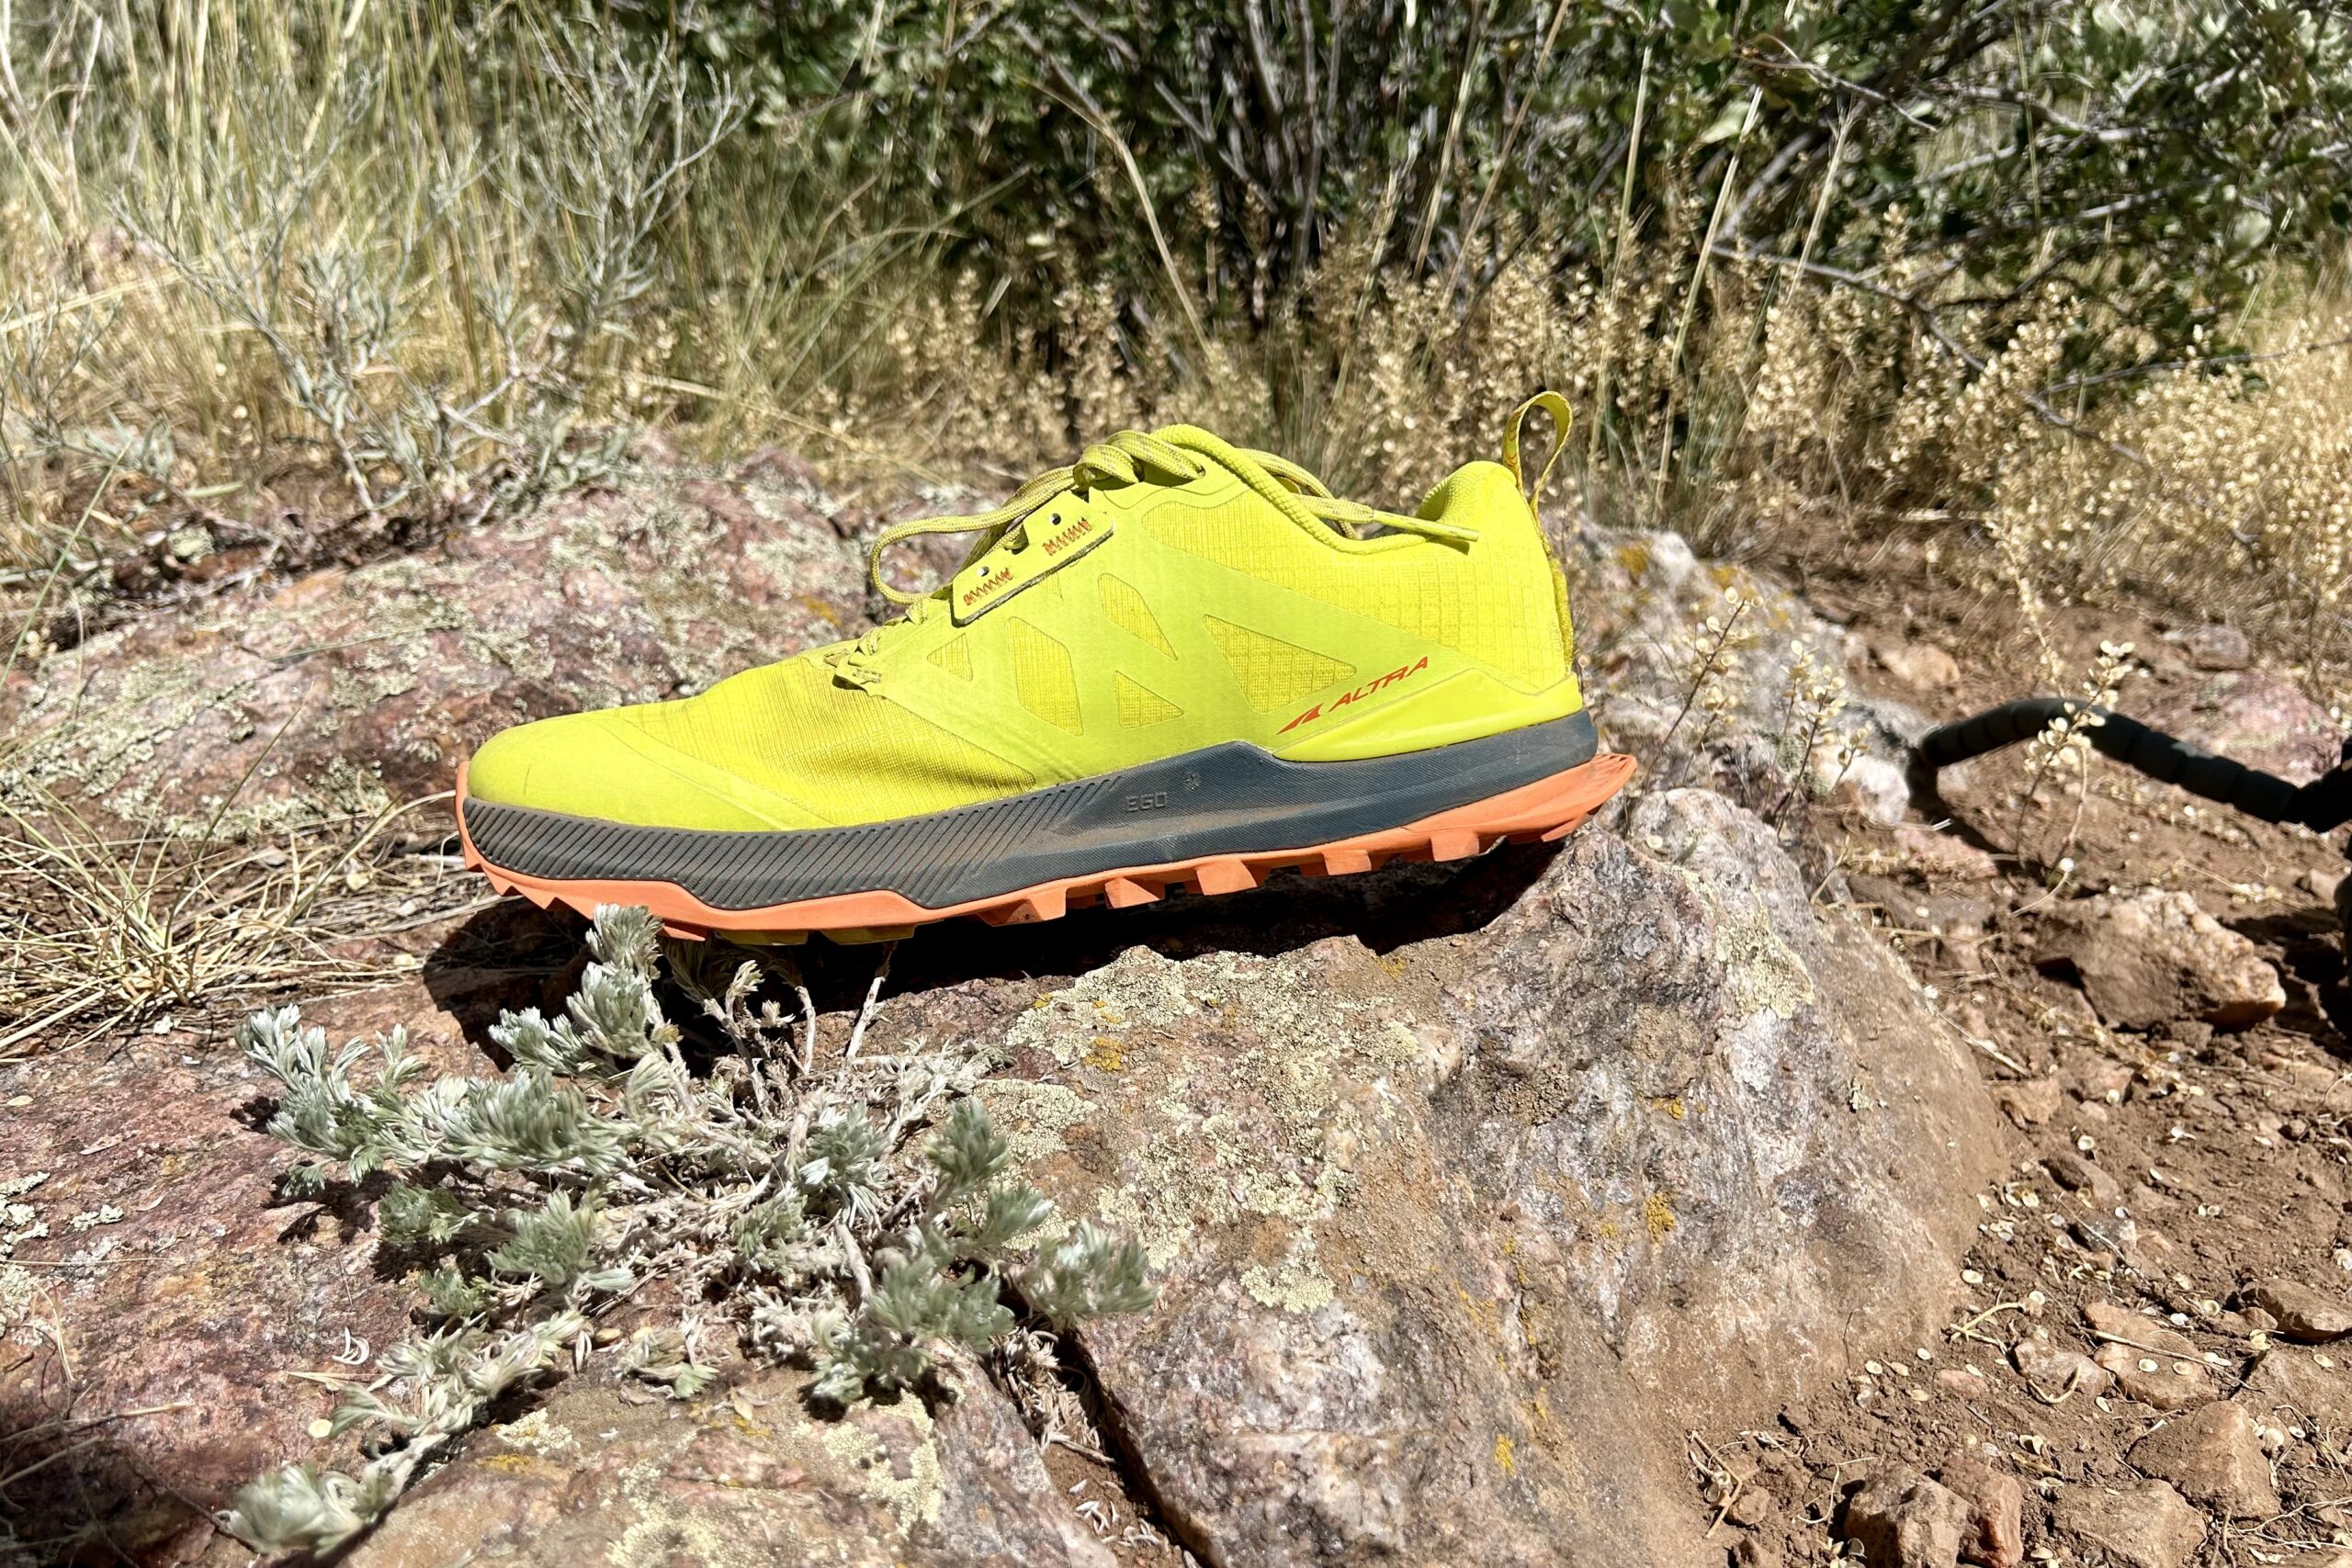 A picture of a hiking shoe staged on a rock in a desert setting.